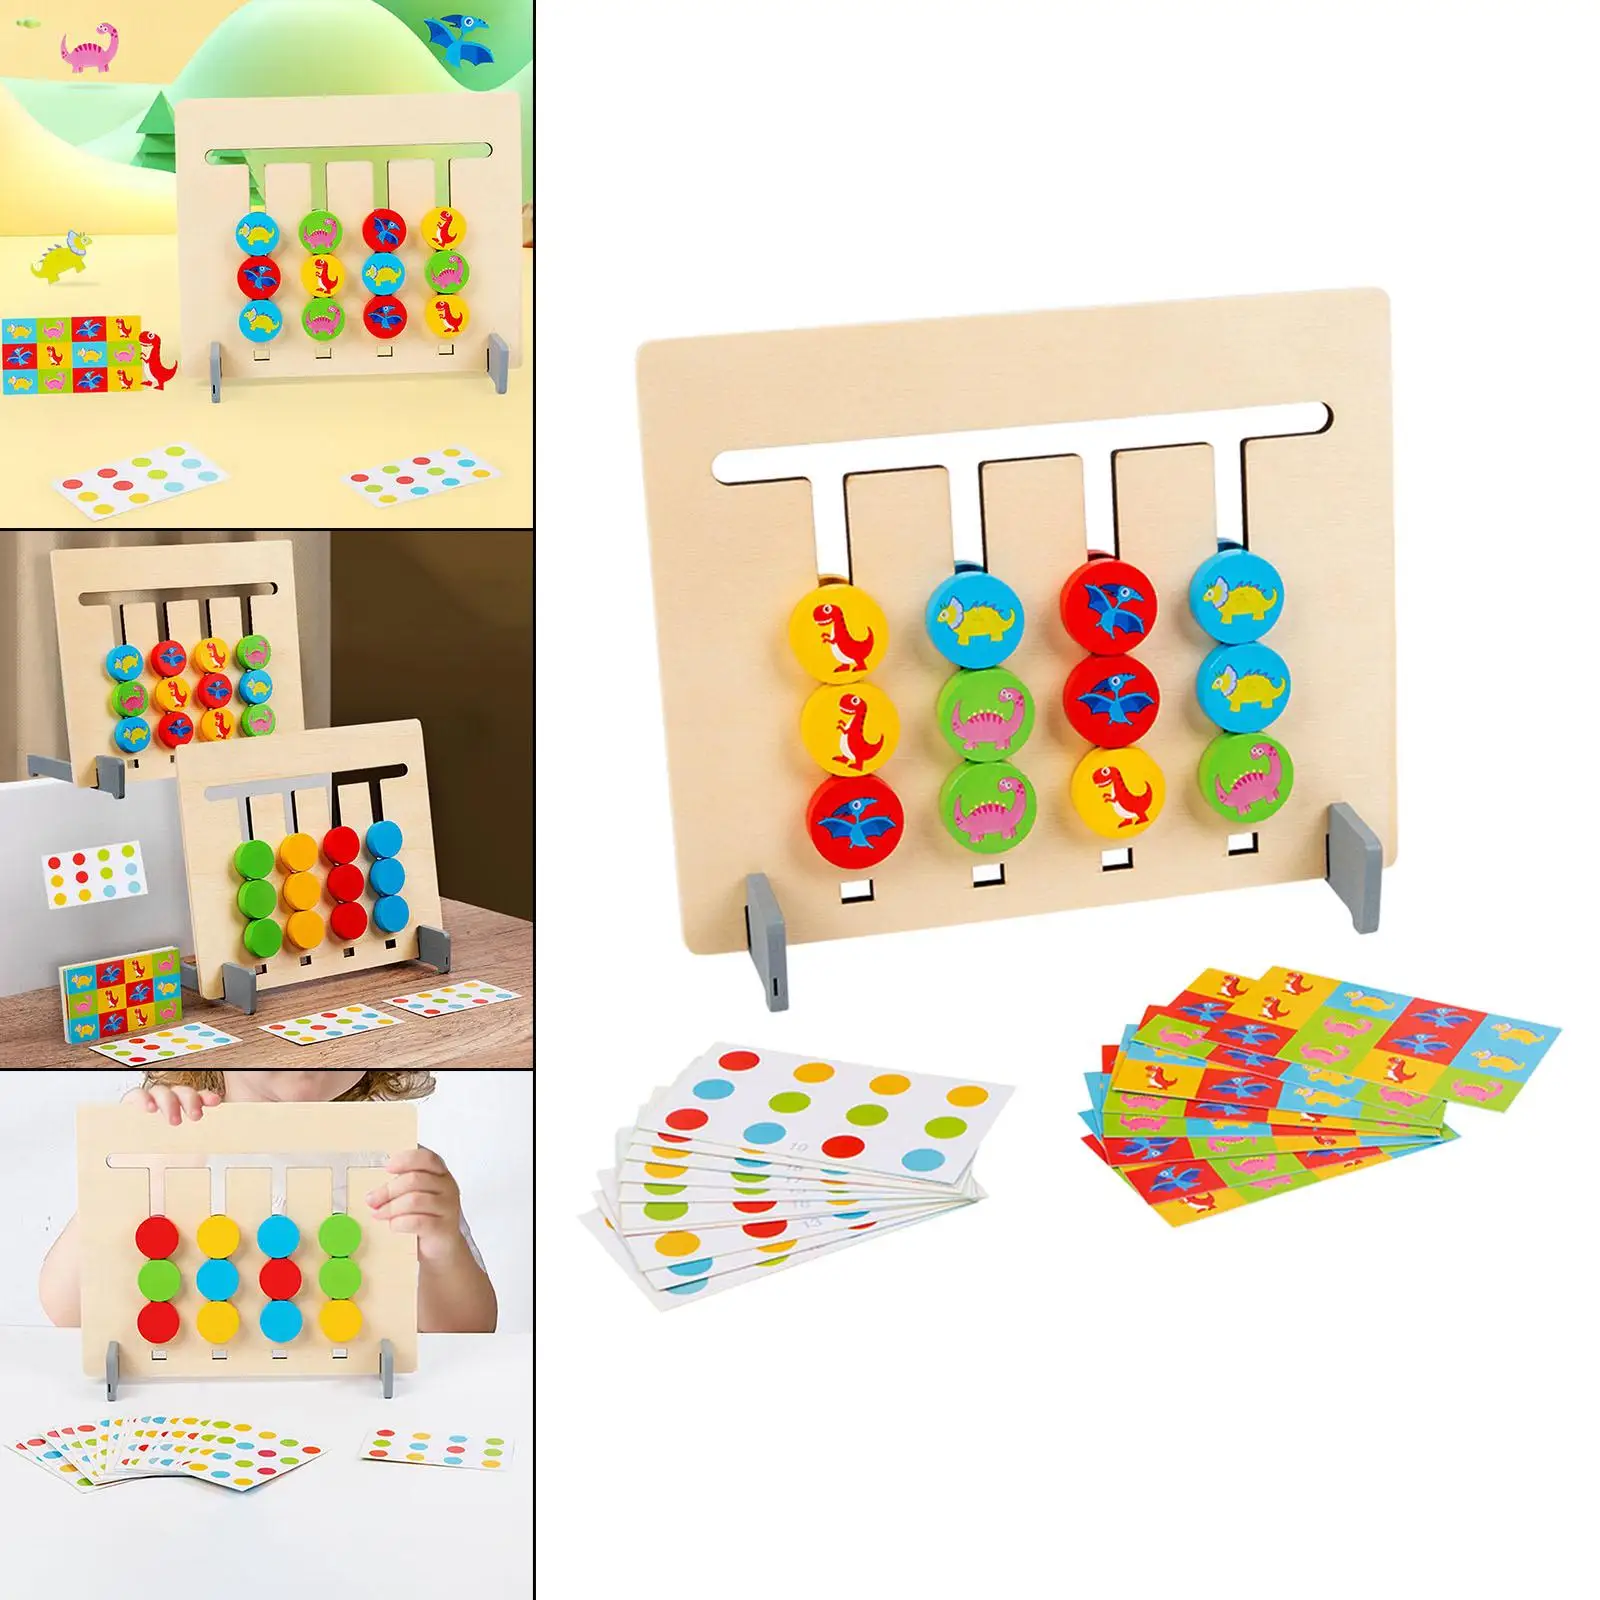 Montessori Slide Puzzle Toy Game Educational Learning Toy Wooden Board Game Blocks Puzzle Brain Teaser Jigsaw for Preschool Kids